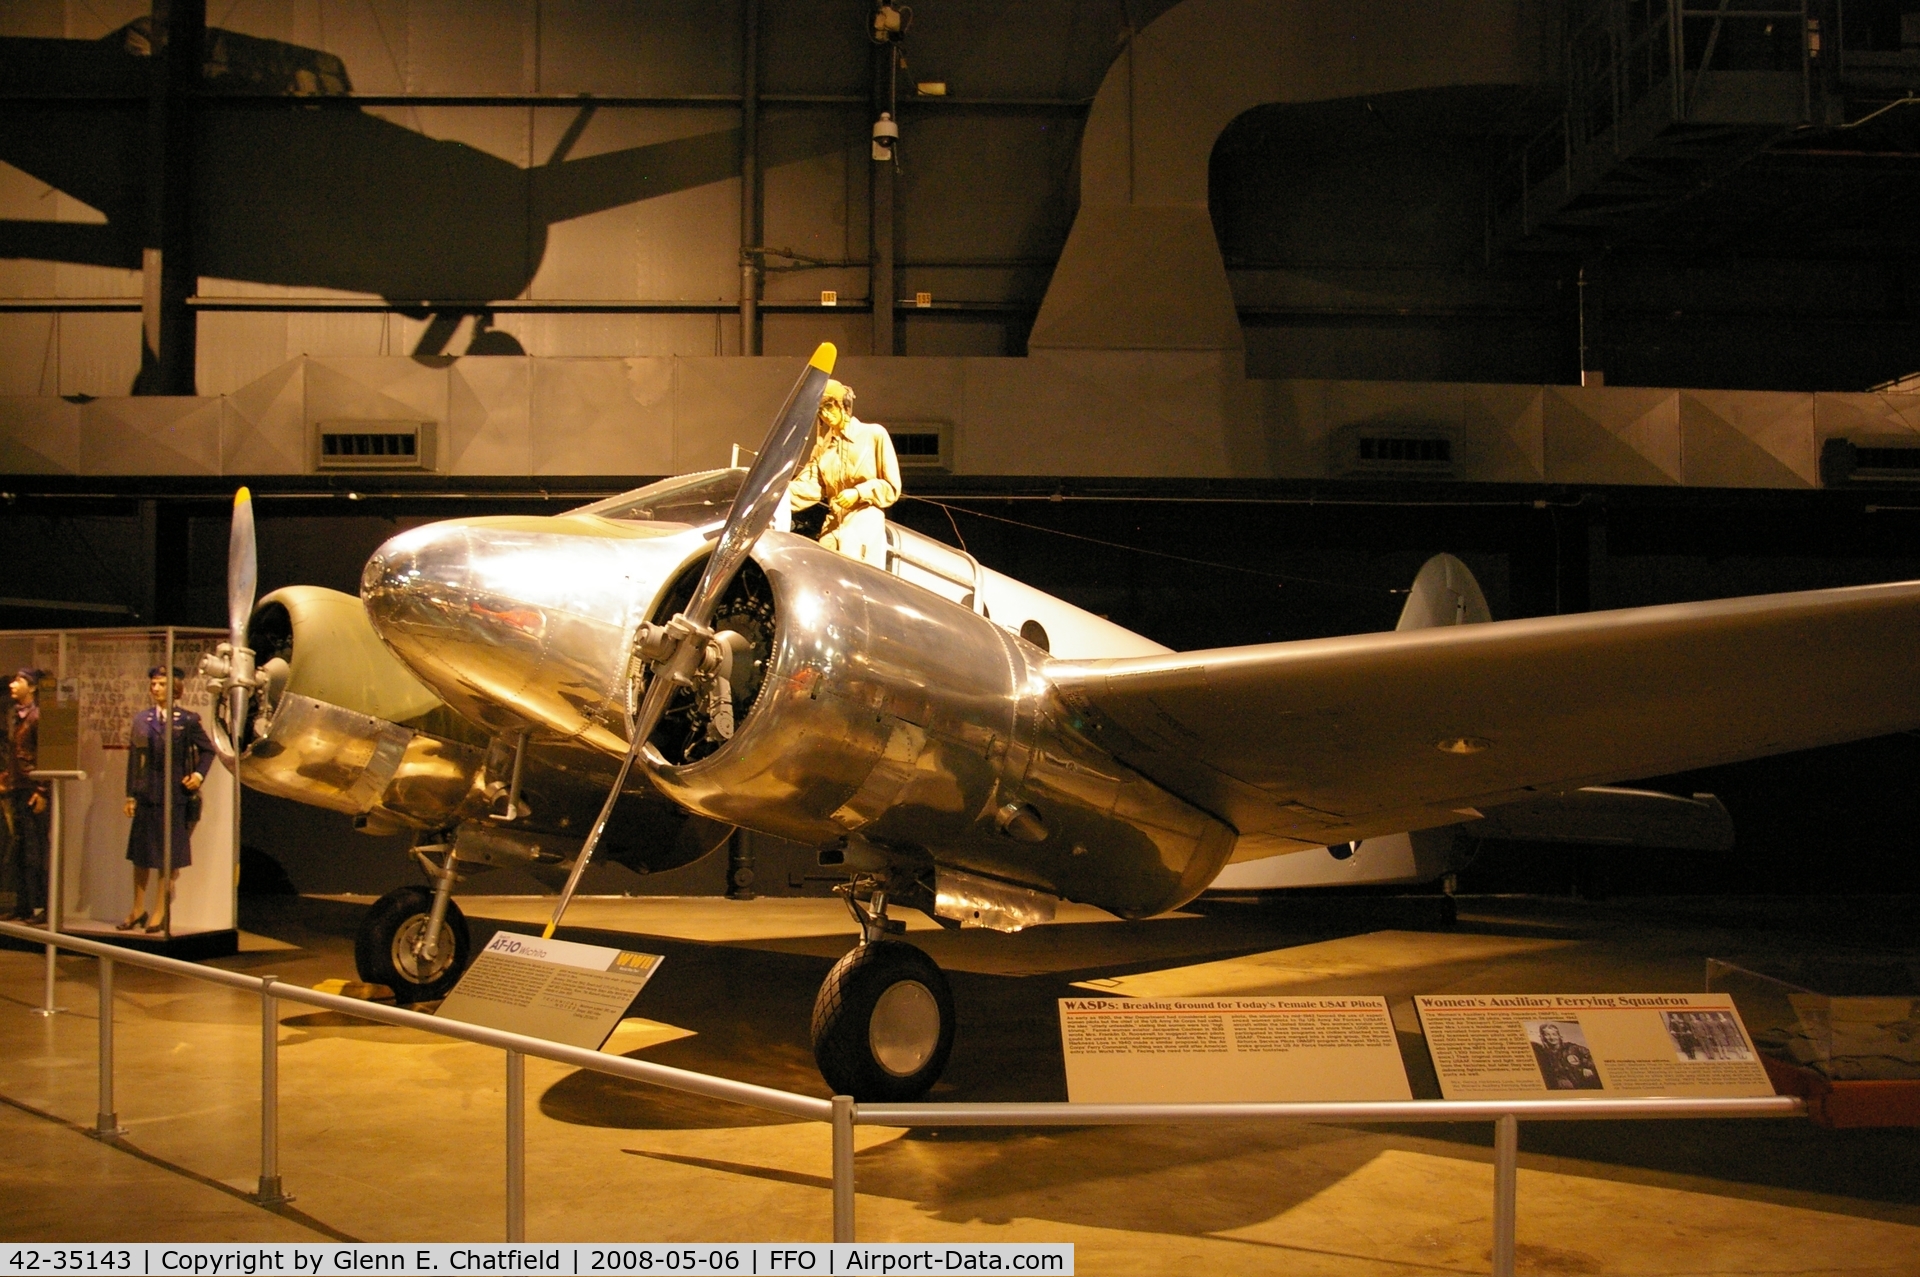 42-35143, 1942 Beech AT-10-GF C/N n/a, Displayed at the National Museum of the U.S. Air Force